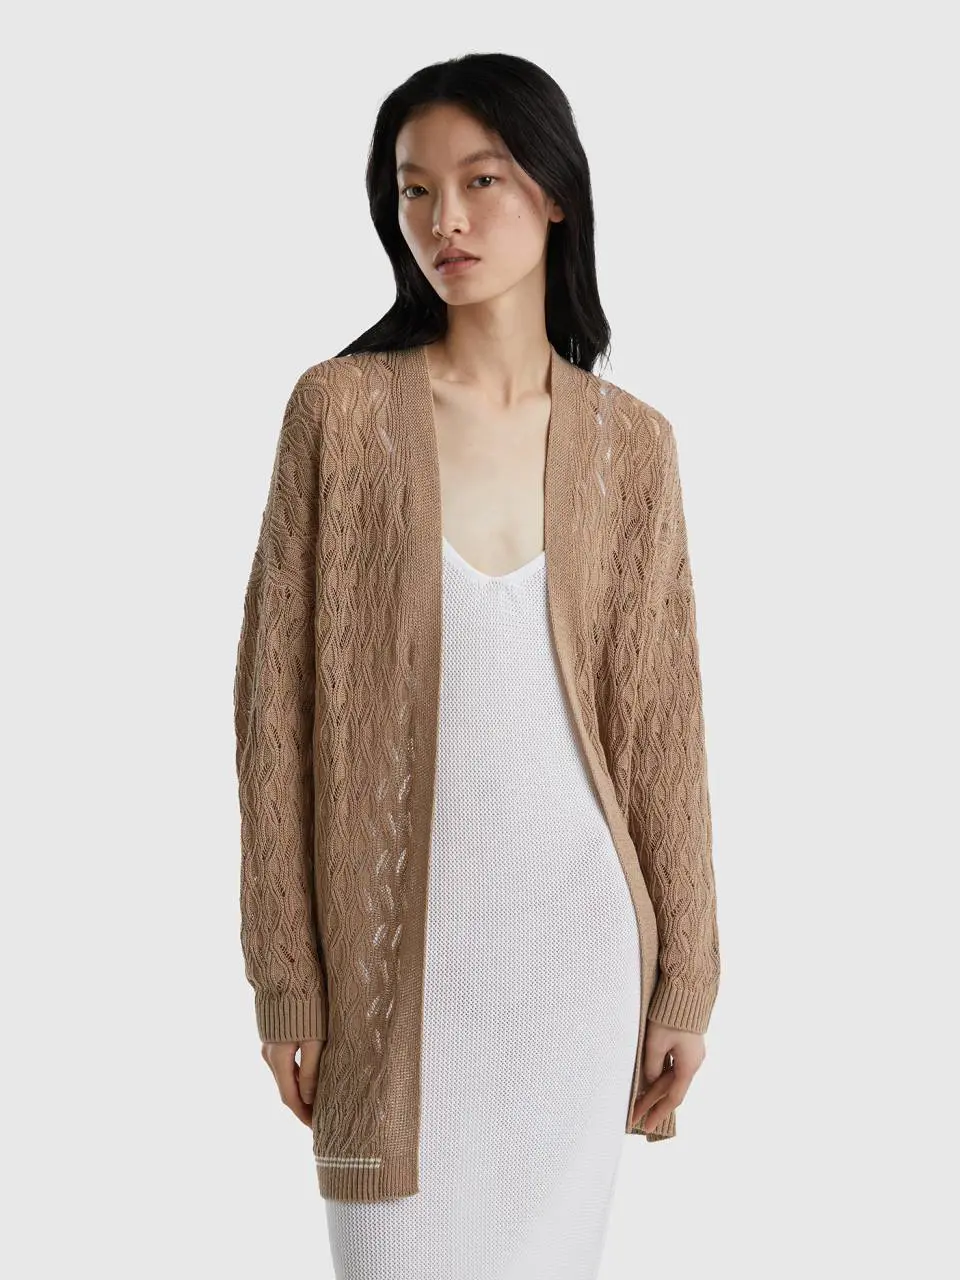 Benetton open-knit cardigan in lace stitch. 1